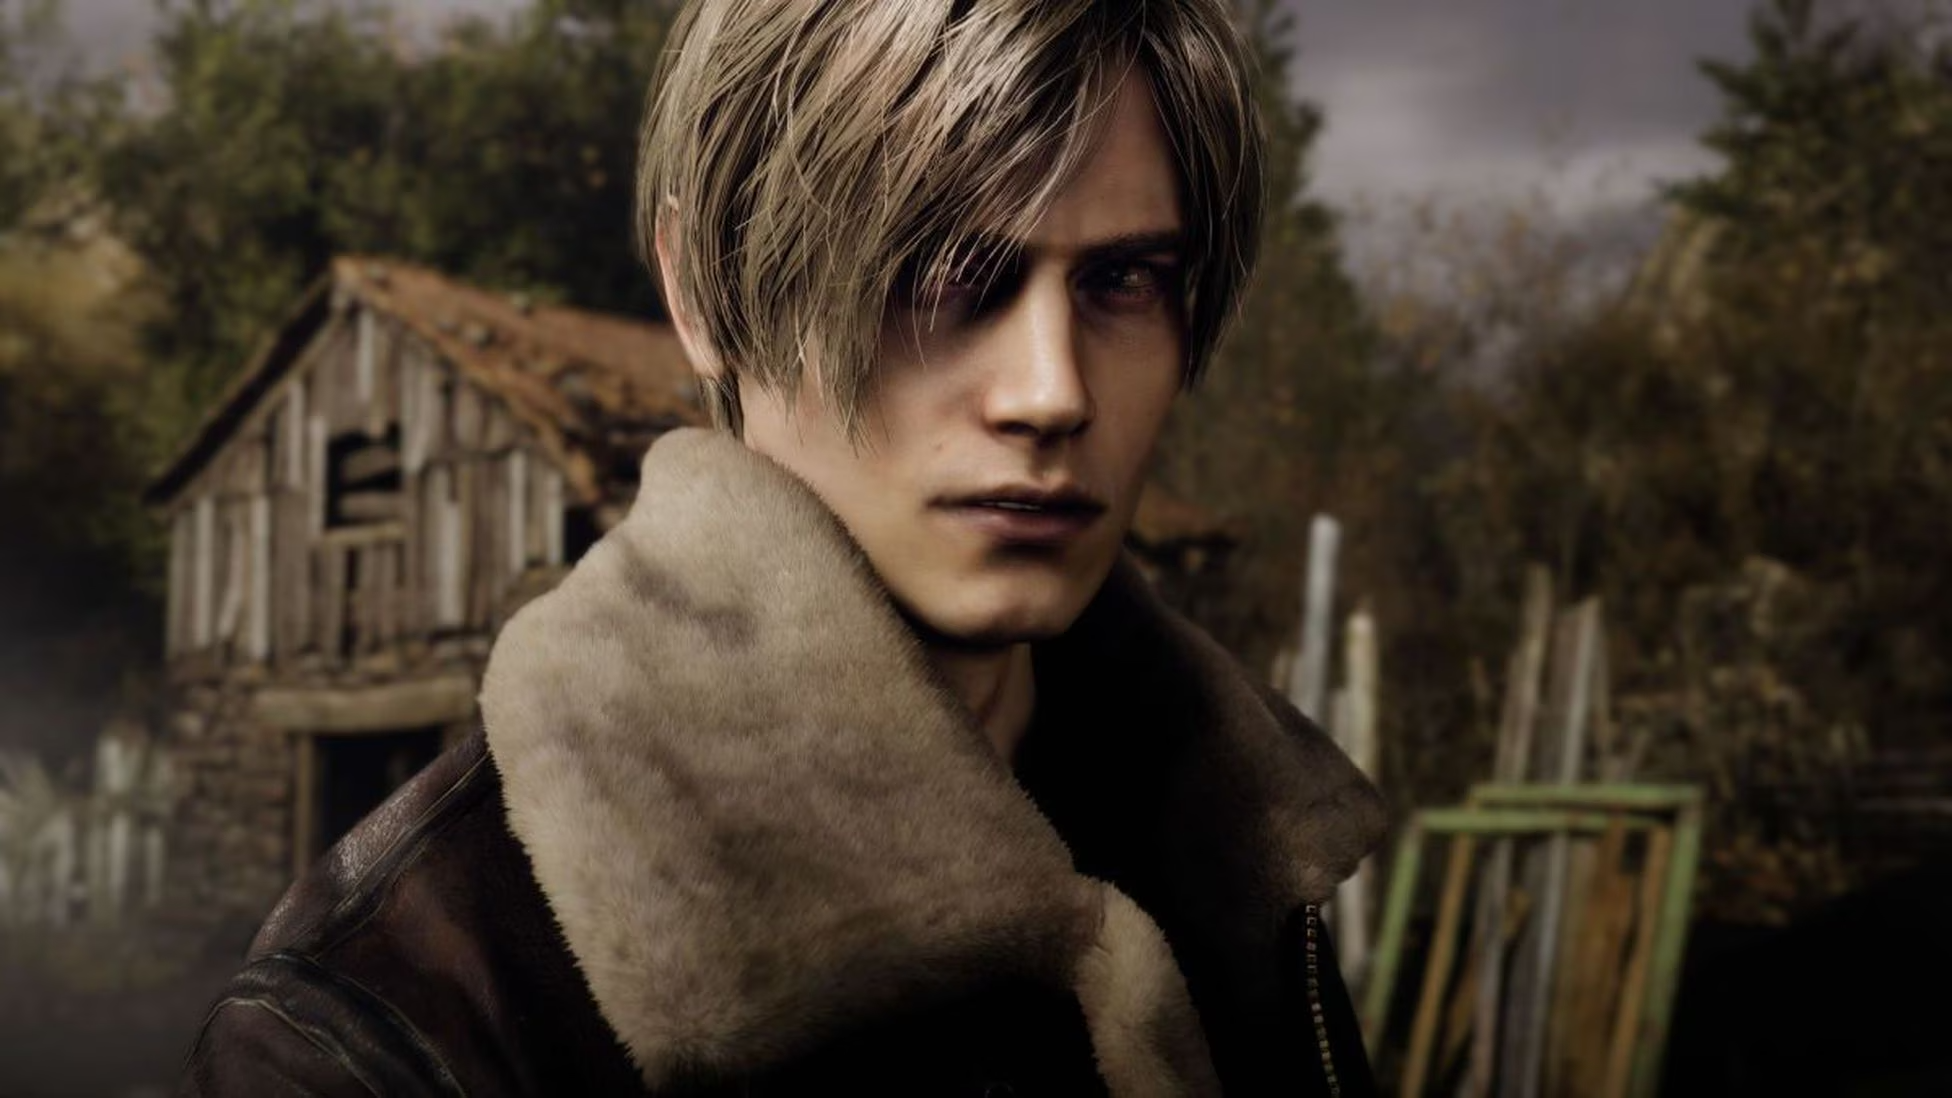 Resident Evil 4 Remake Demo: A First Look at the Upcoming Game